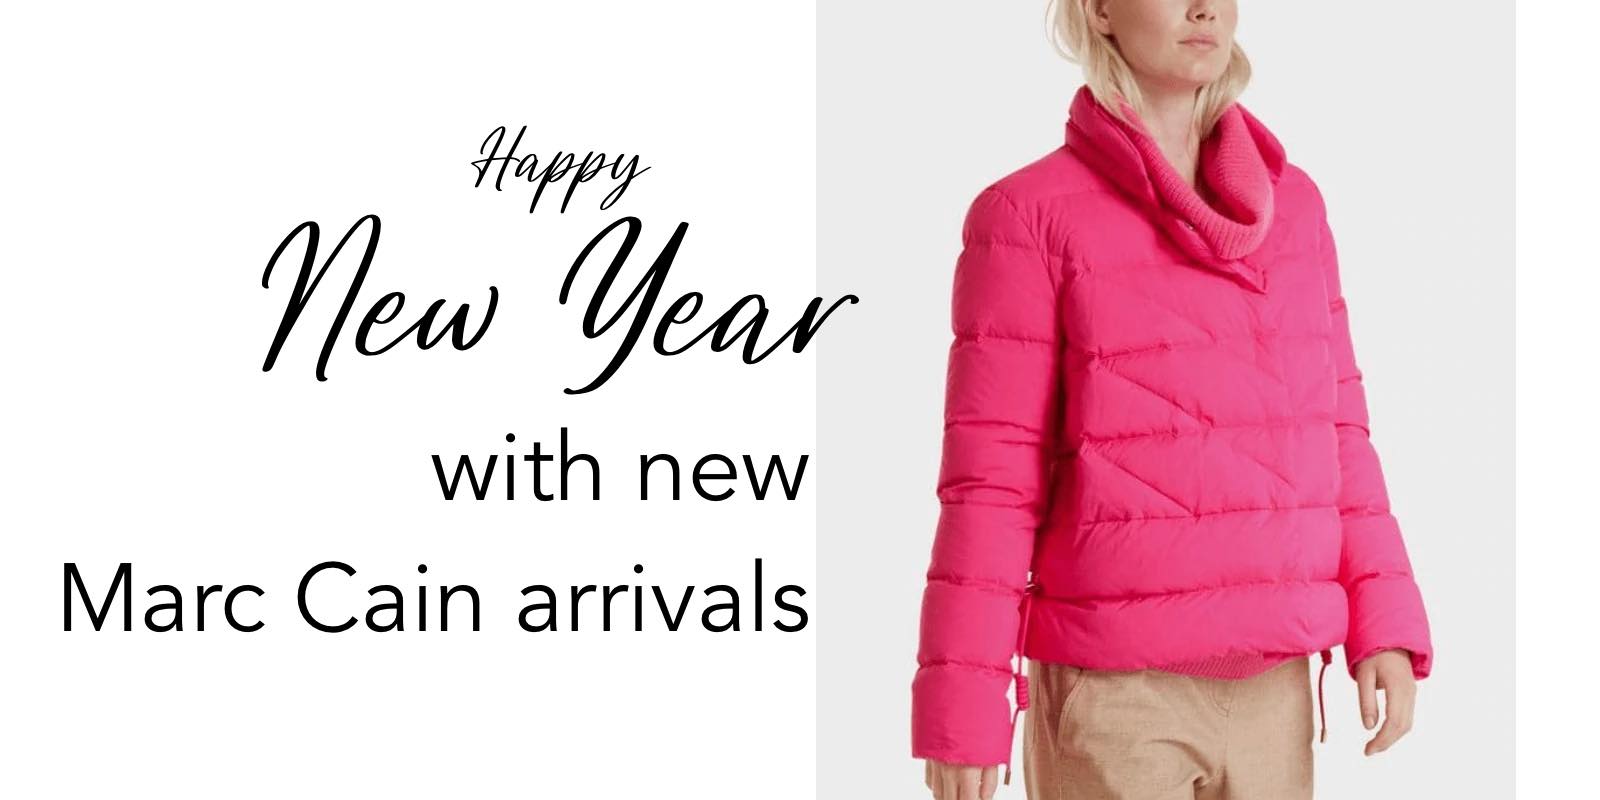 Happy New Year with New Marc Cain Arrivals